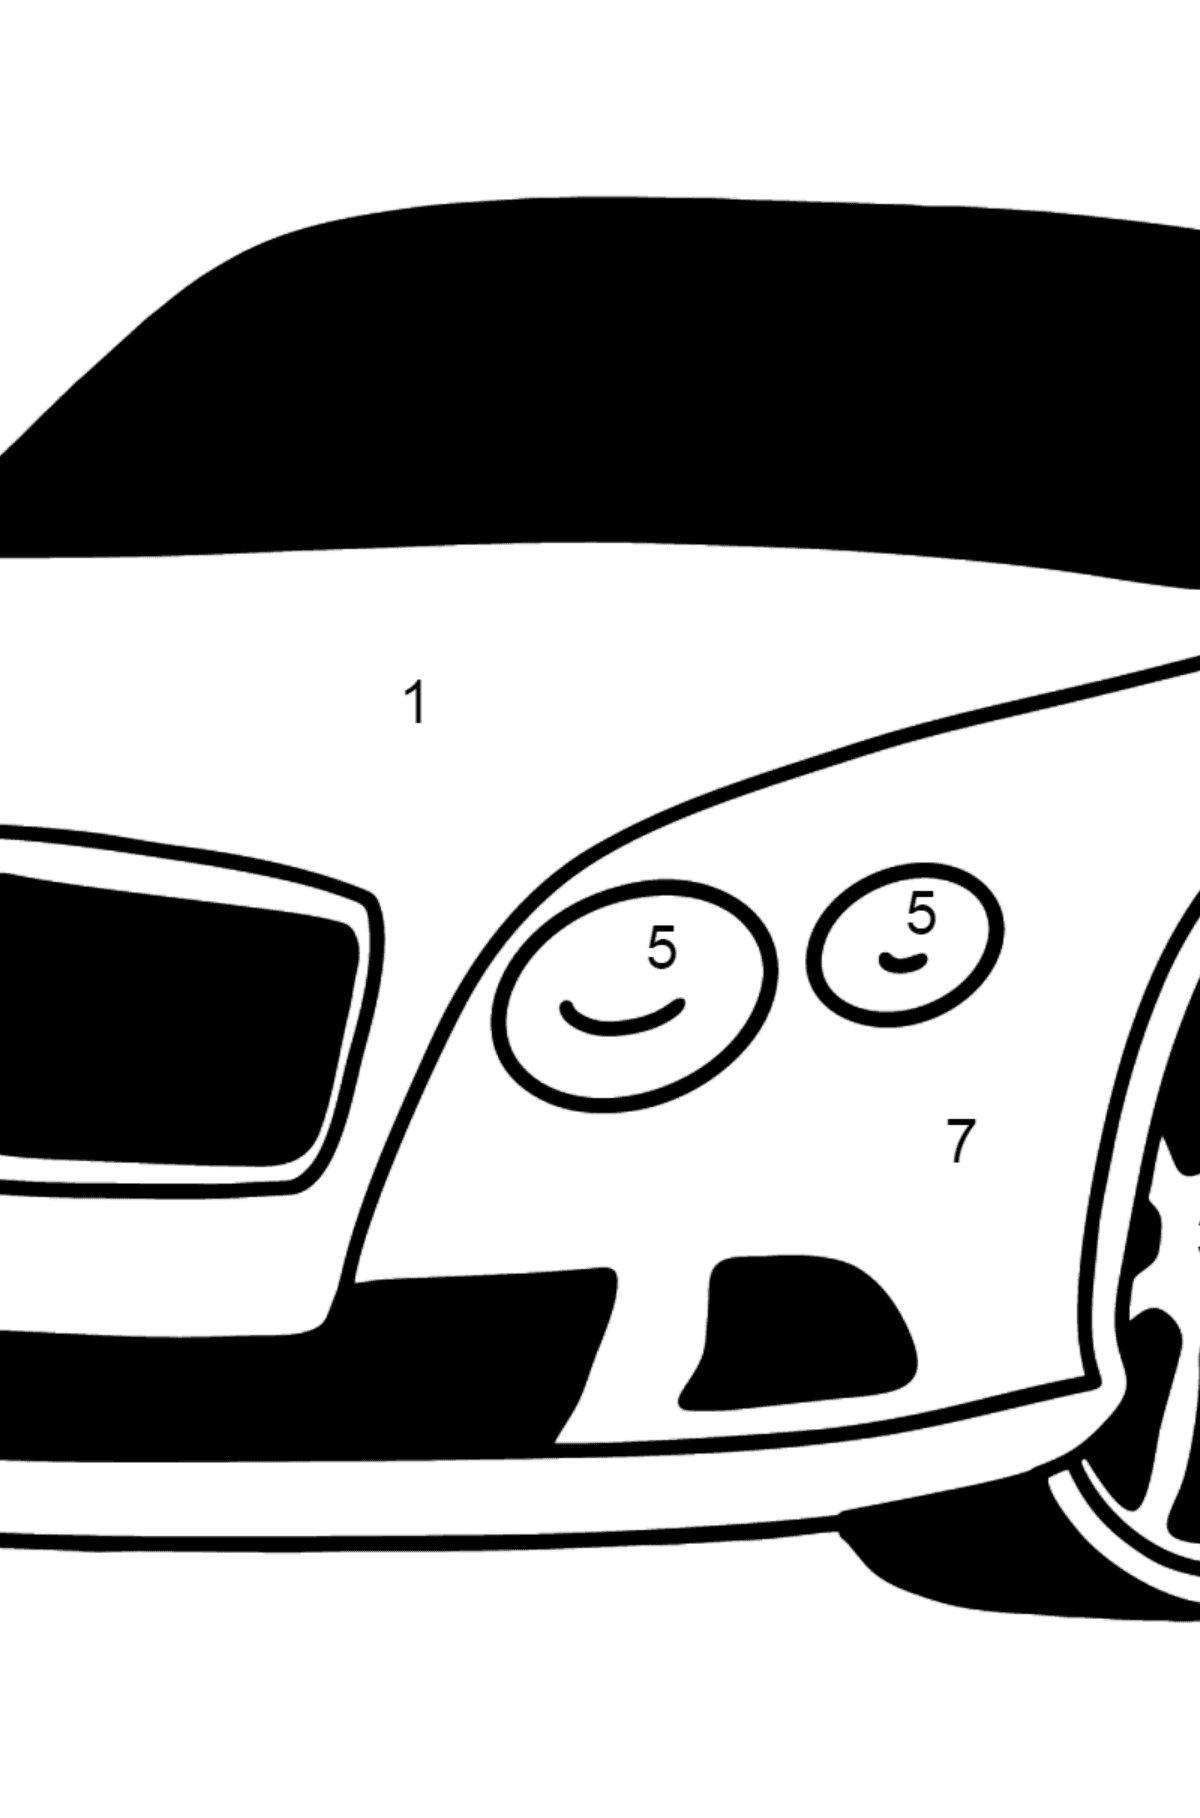 Bentley Continental GT Car coloring page - Coloring by Numbers for Kids